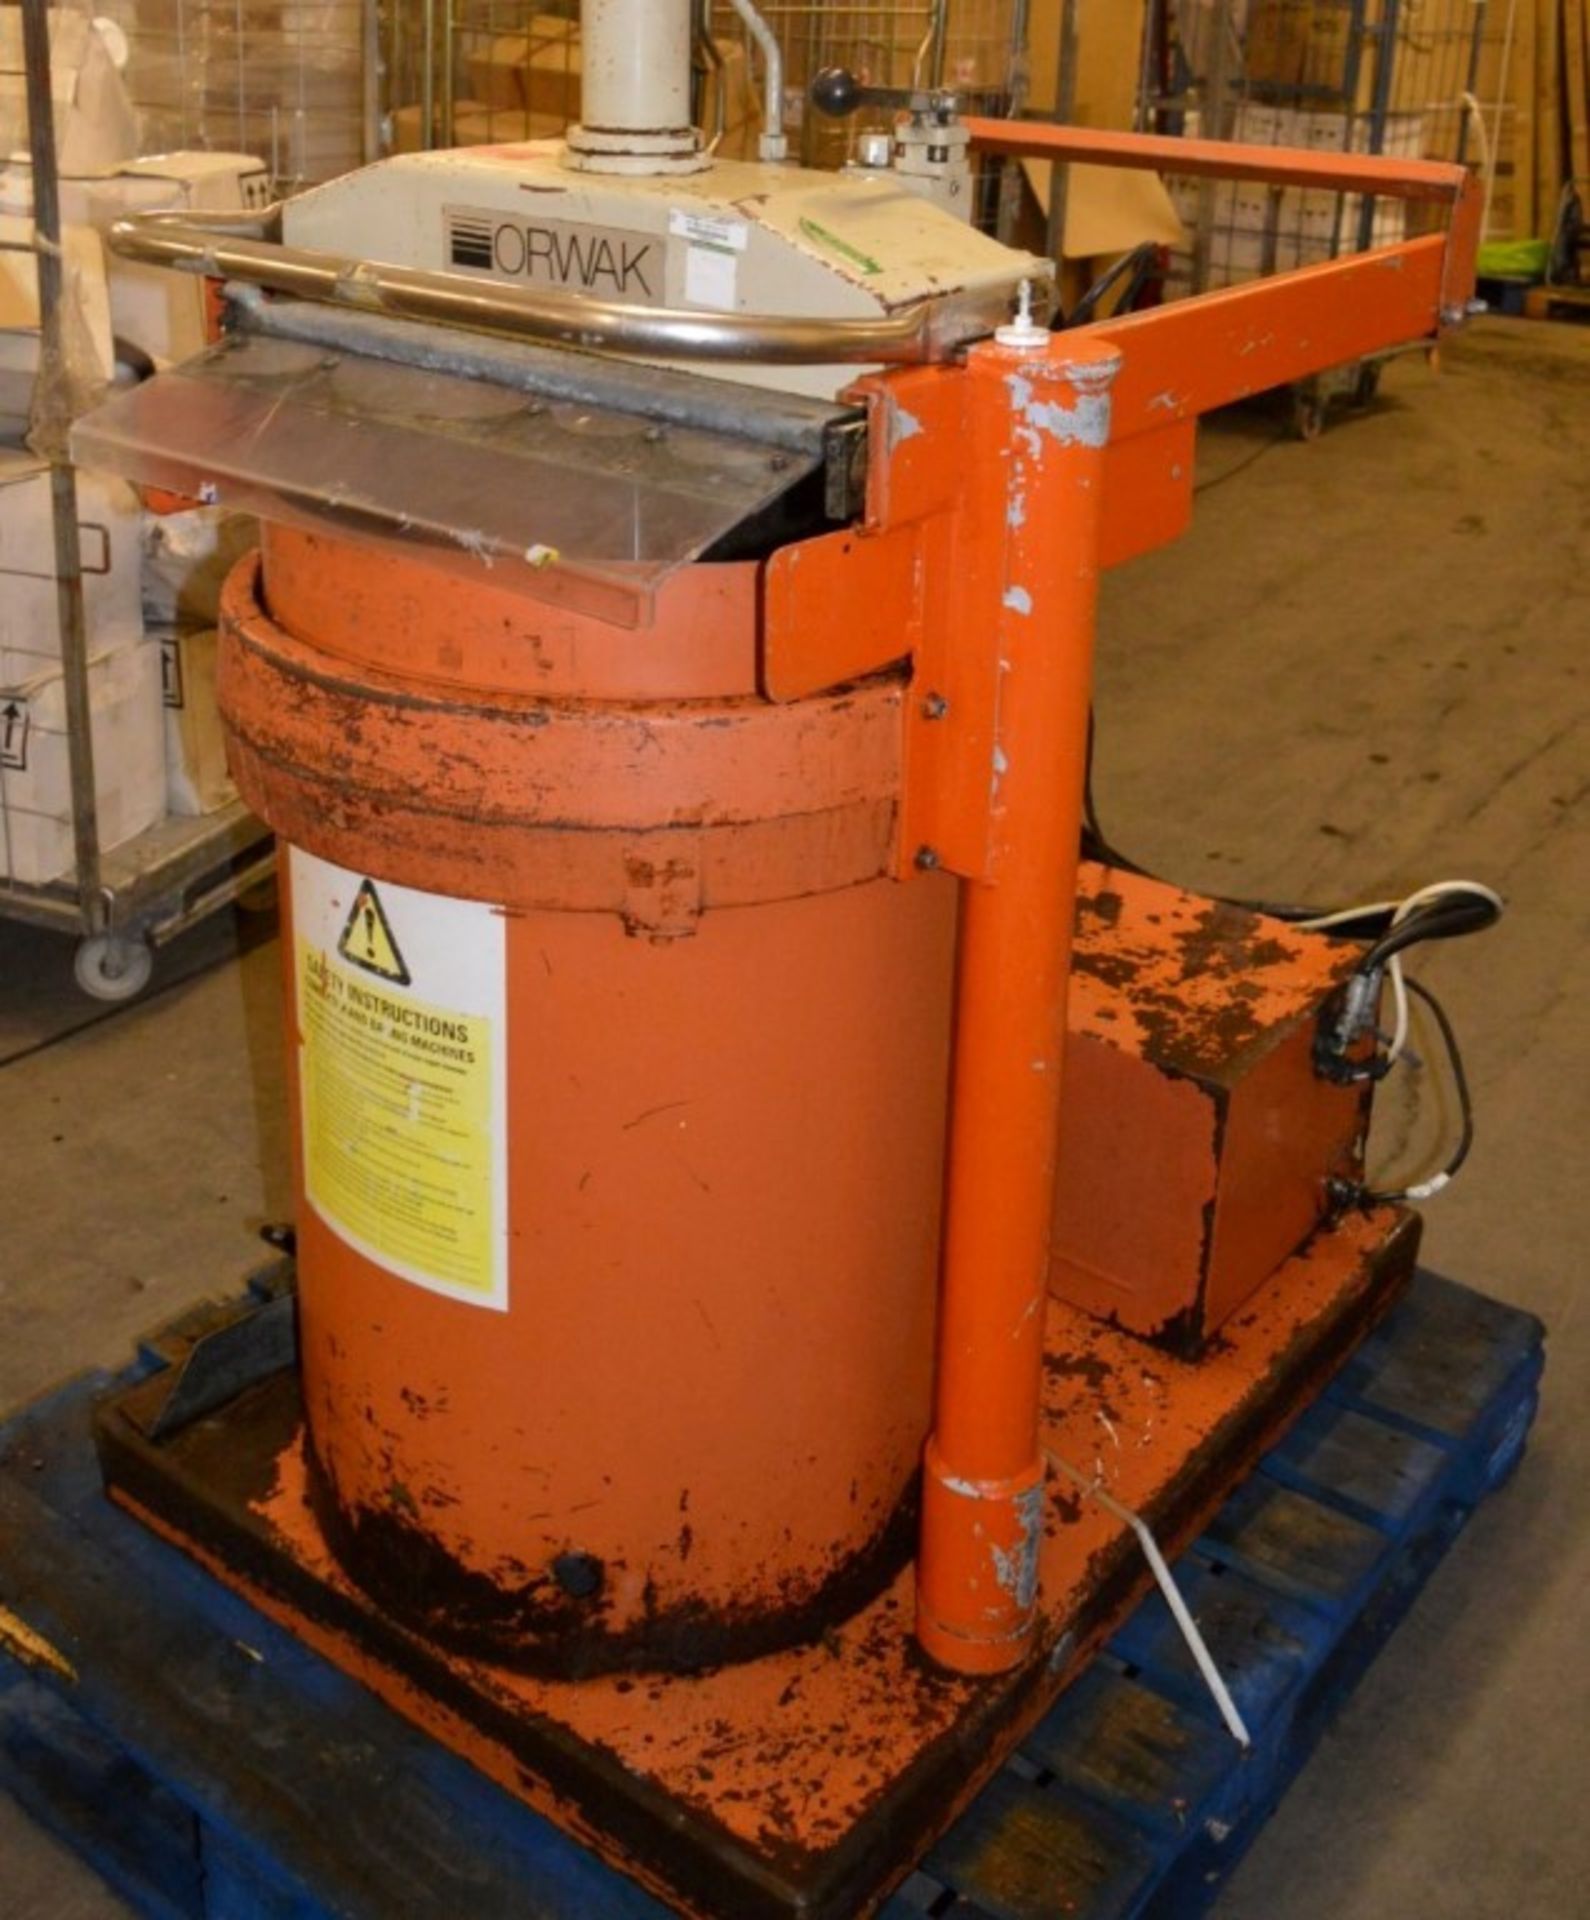 1 x Orwak 5030 Waste Compactor - Used For Compacting Recyclable or Non-Recyclable Waste - - Image 3 of 4